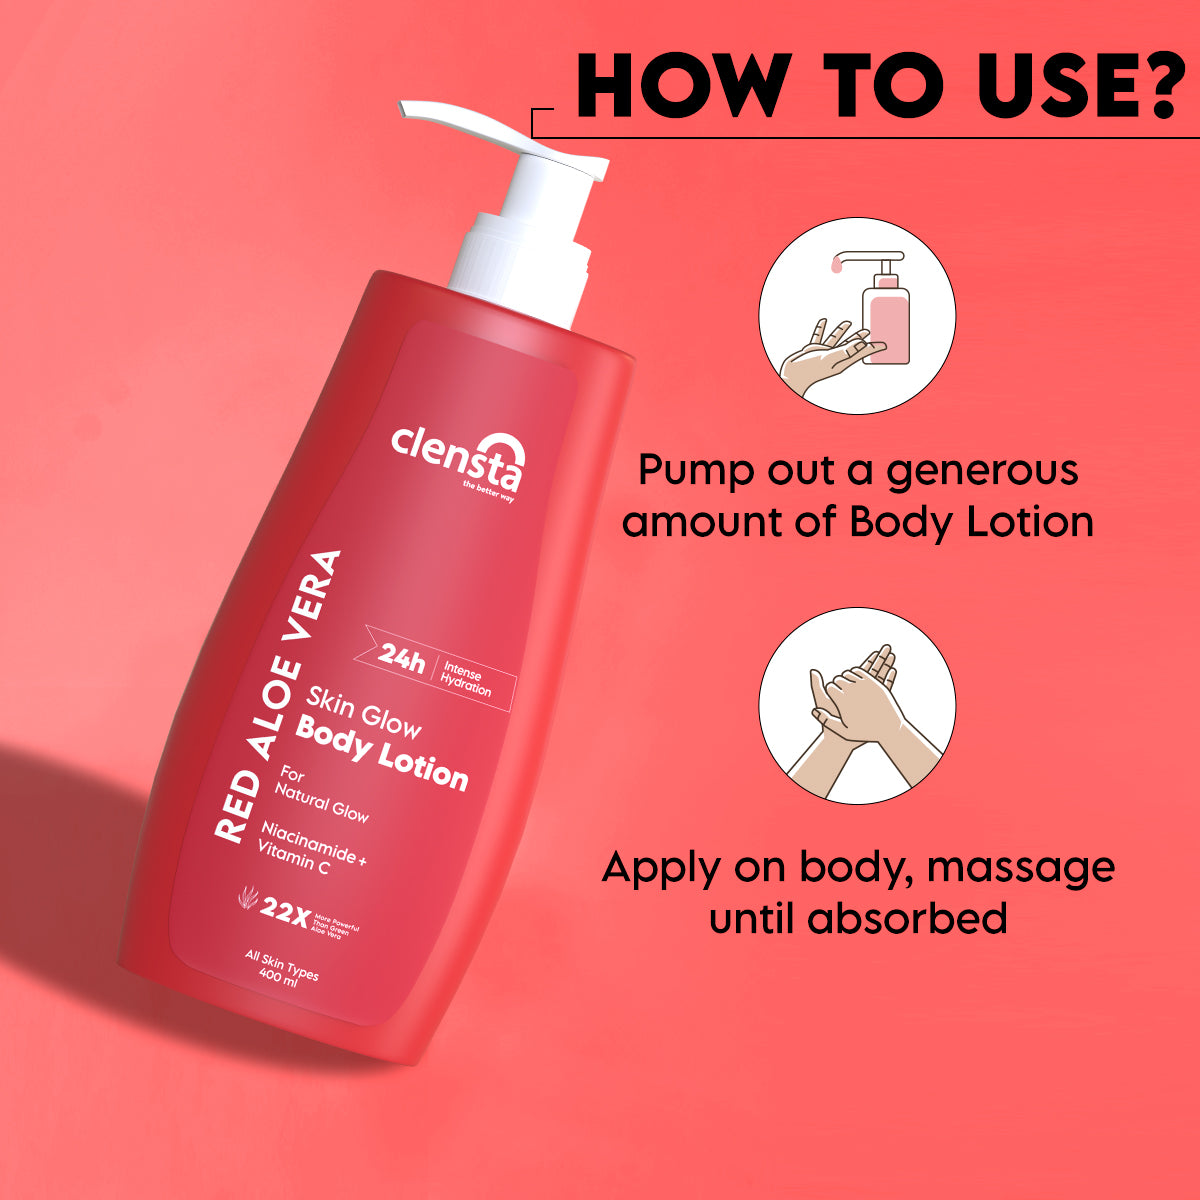 Red Aloe Vera Skin Glow Body Lotion Enriched with 2% Niacinamide & Vitamin C for Collagen Production, Pore Tightening, Softening Fine Lines and an Even Skin Tone - Pack of 2